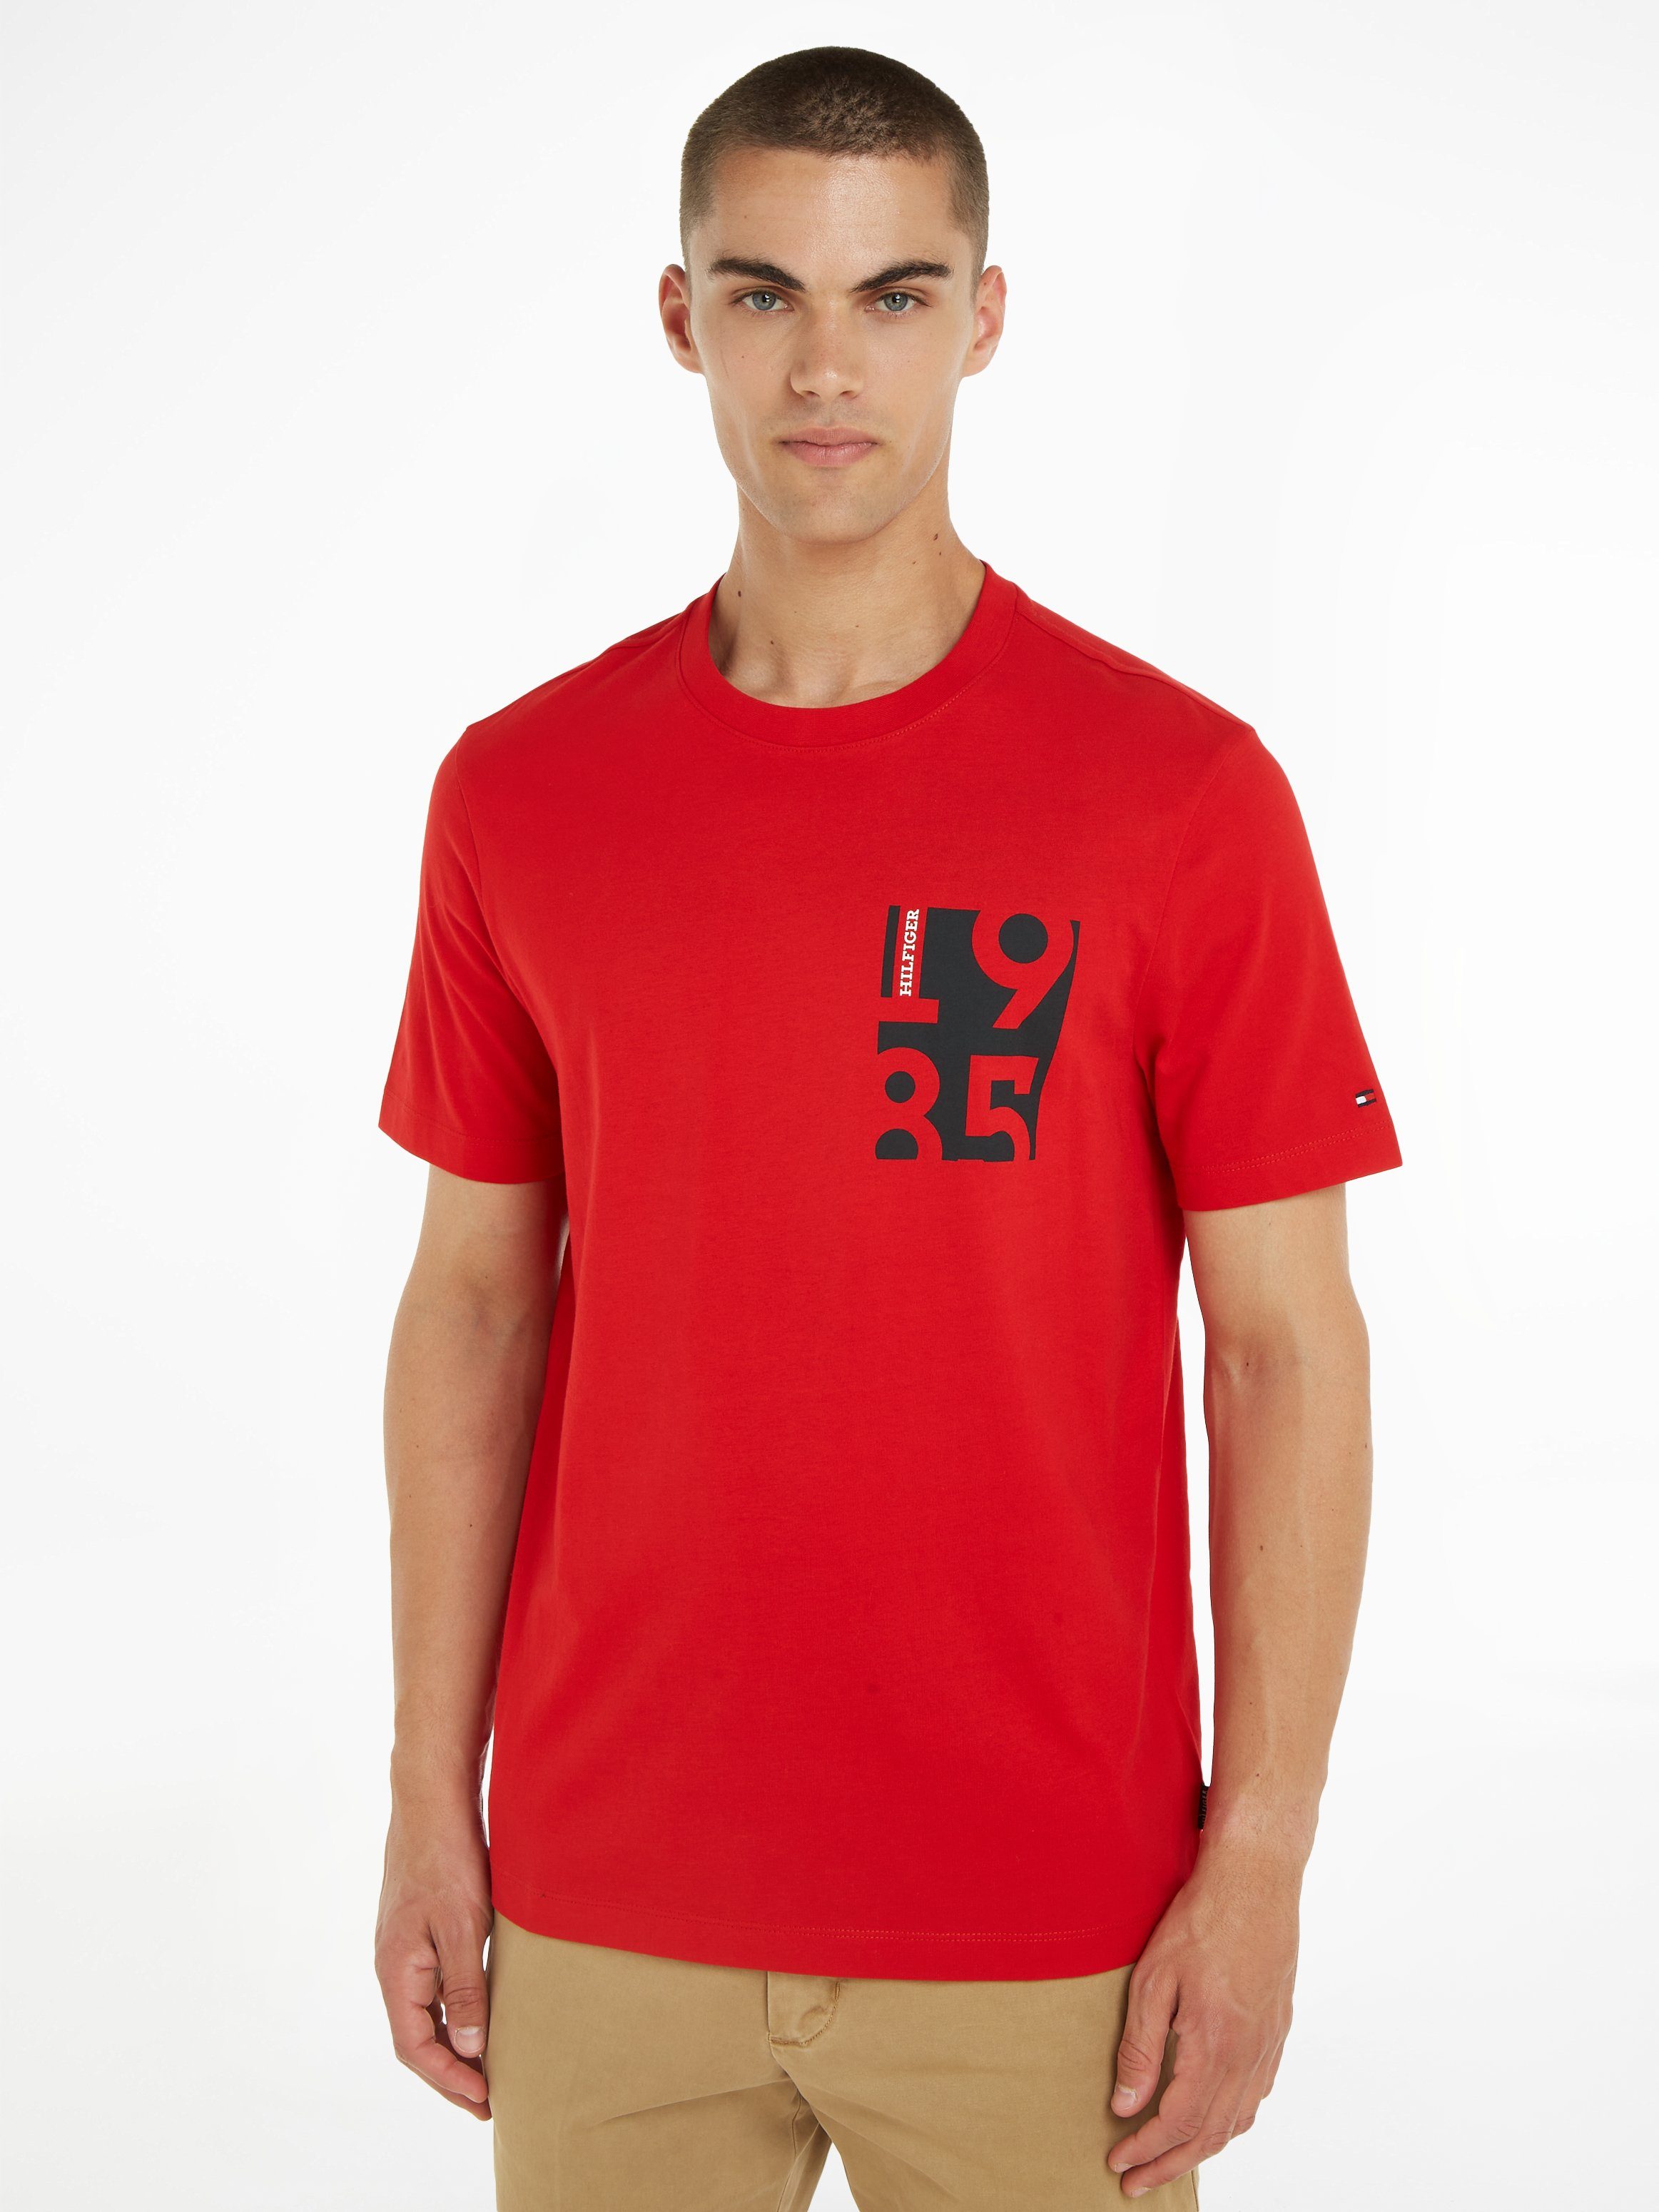 Red PRINT Tommy Hilfiger CHEST T-Shirt Primary TEE